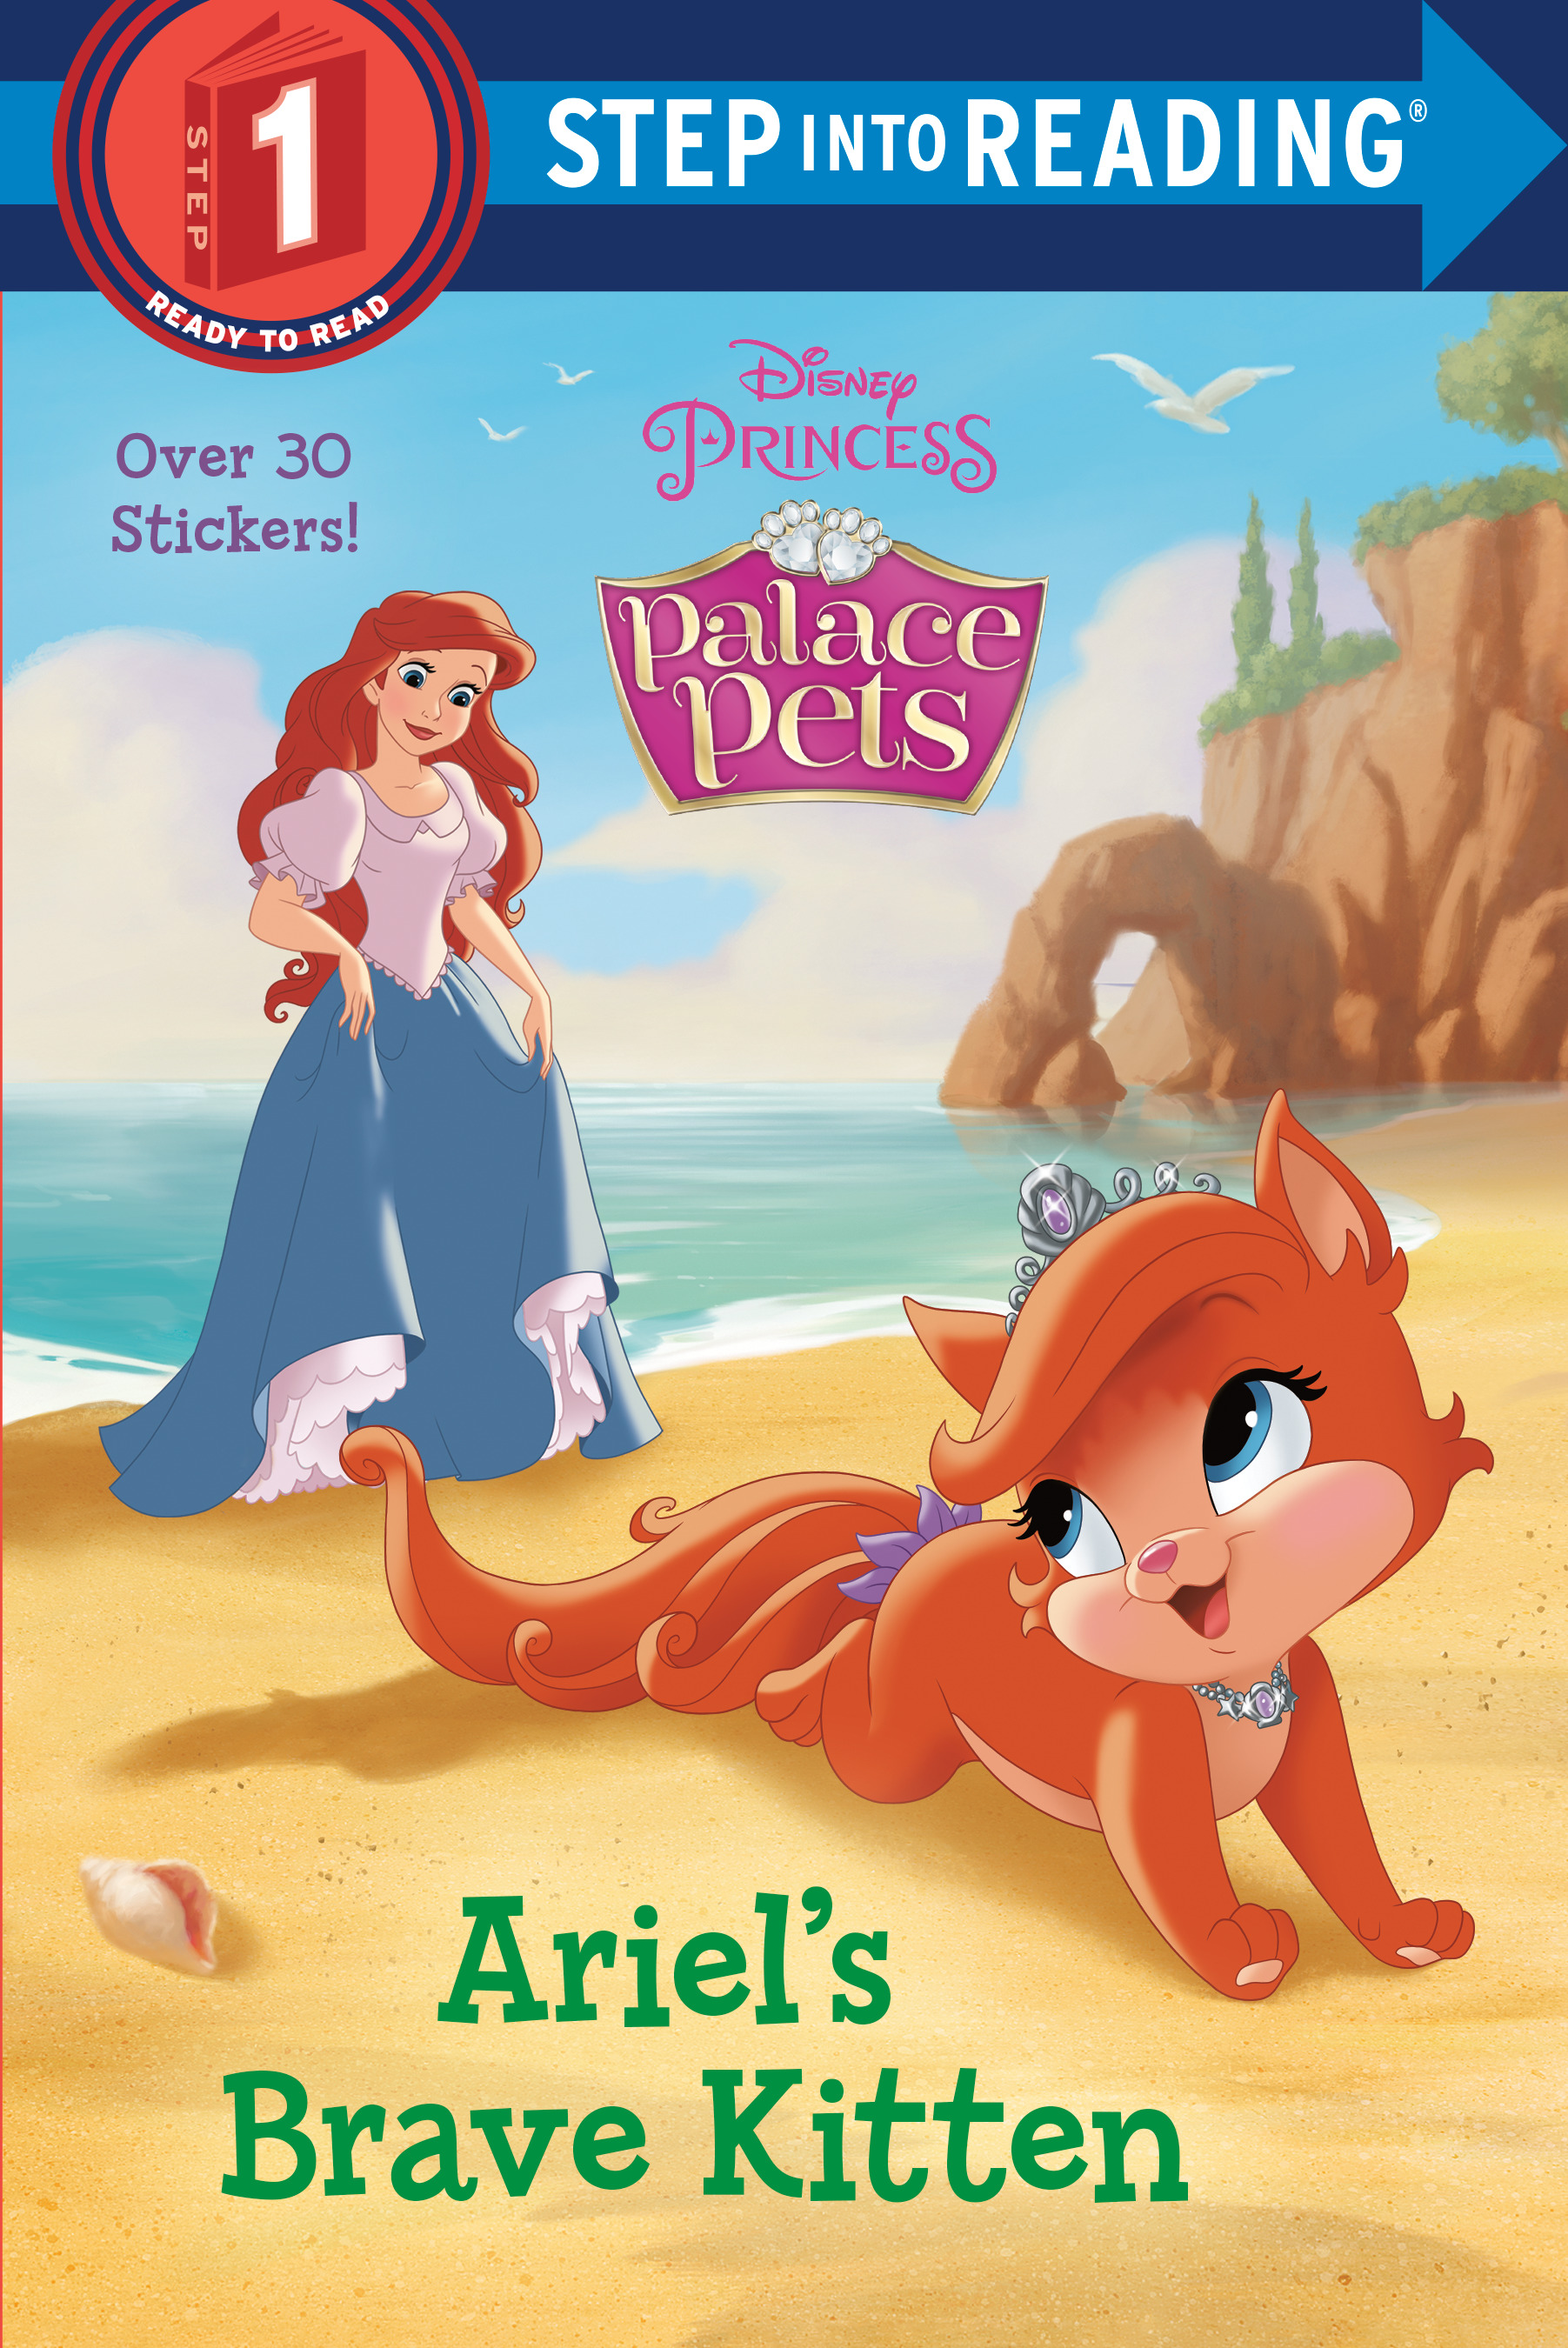 Step Into Reading - Ariel's Brave Kitten (Disney Princess: Palace Pets) | First reader